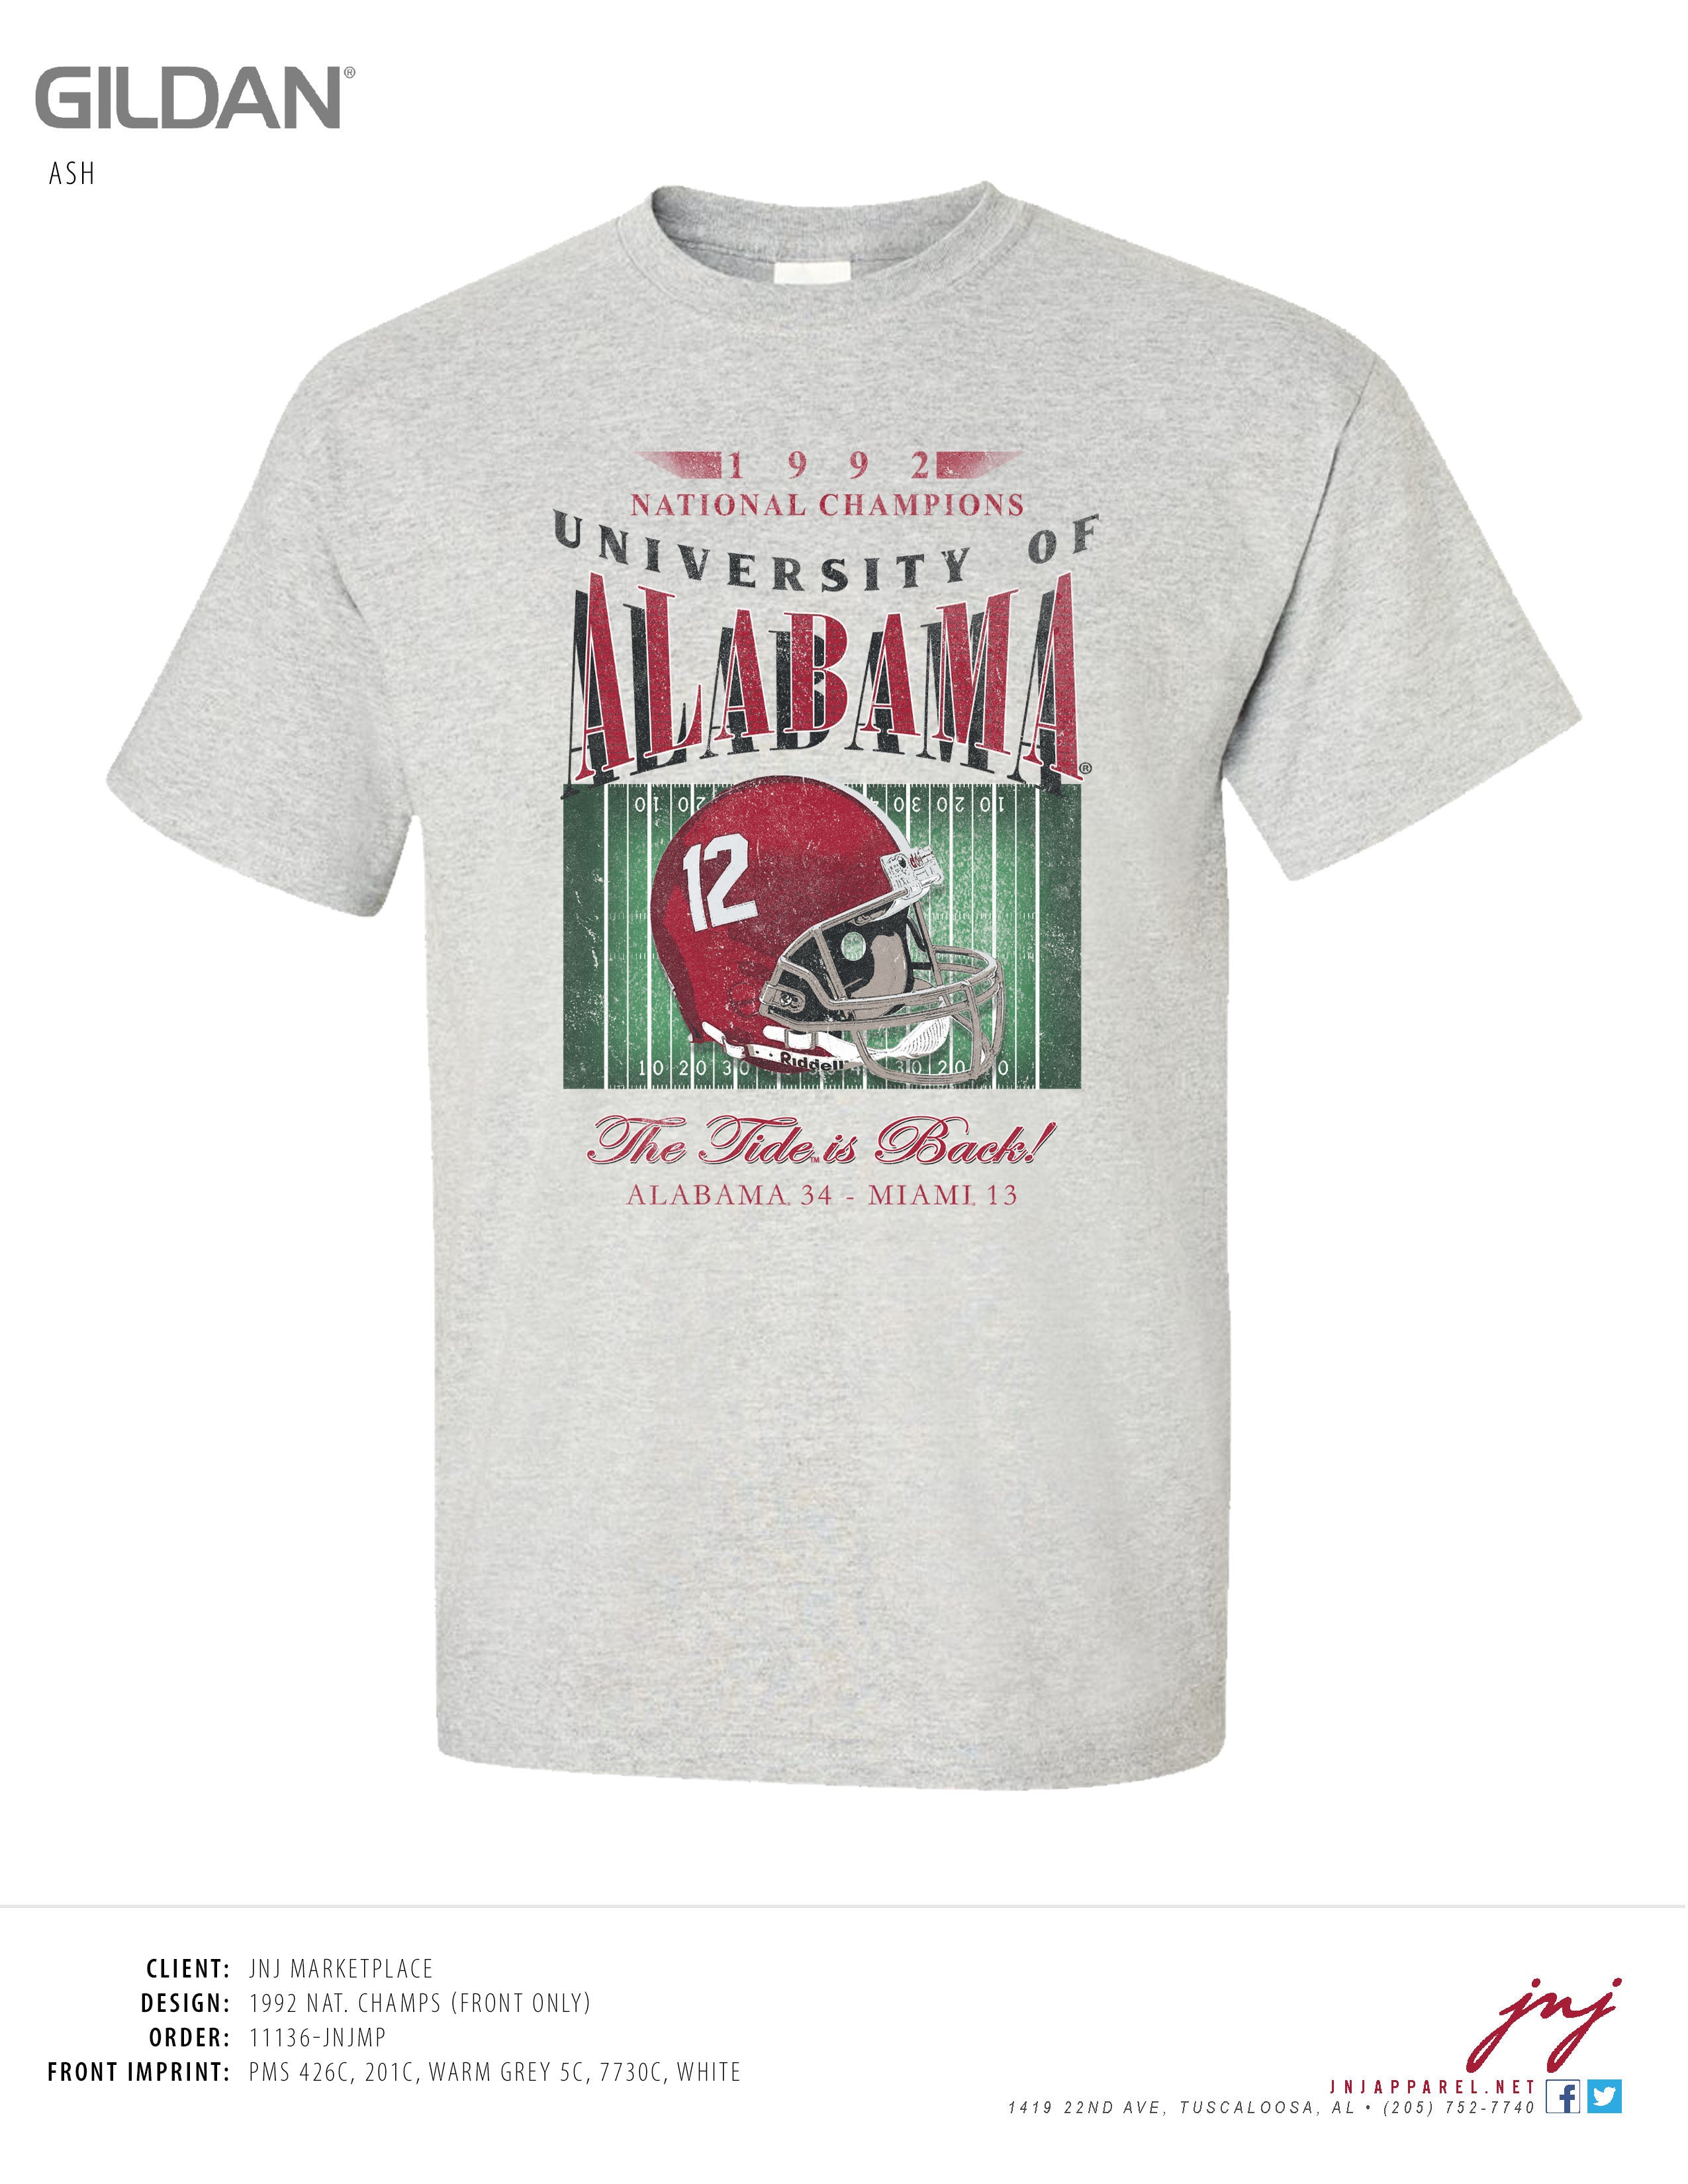 Tuscaloosa City of Champions T-Shirt for Alabama College Football Fans